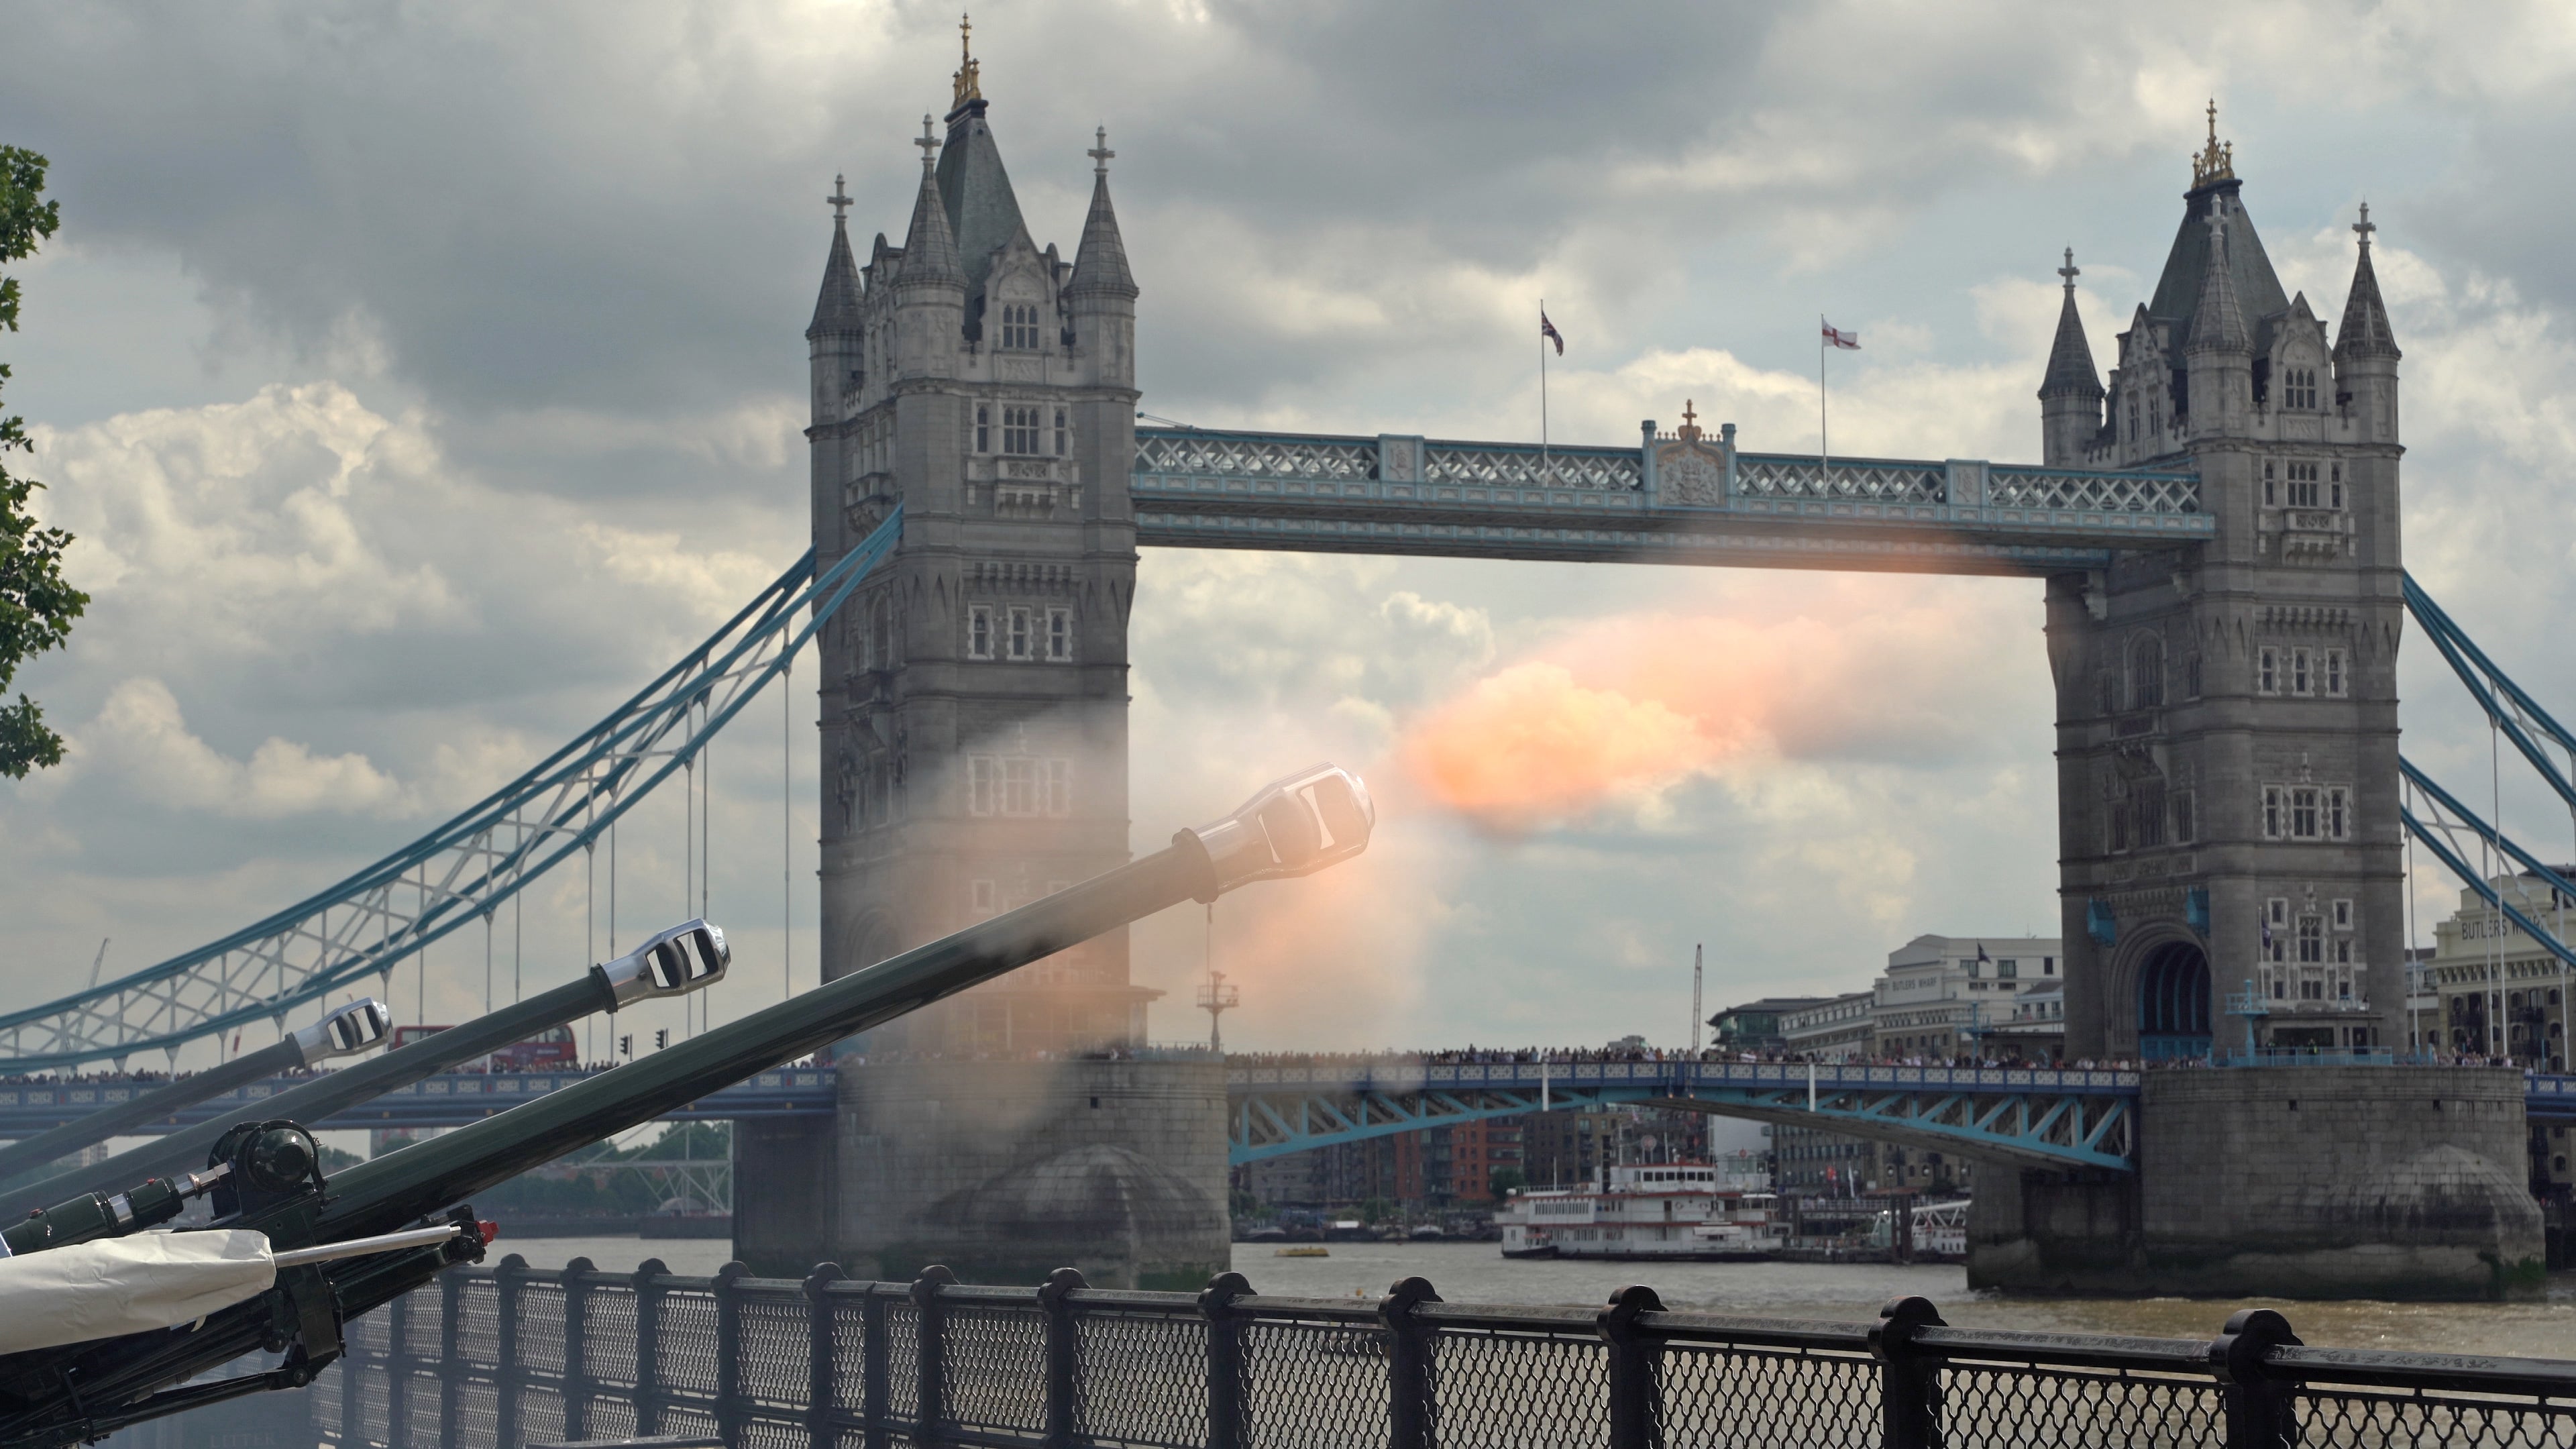 The Honourable Artillery Company during the Royal Gun Salute at Tower Bridge to mark the start of the Platinum Jubilee celebratory weekend in June 2022